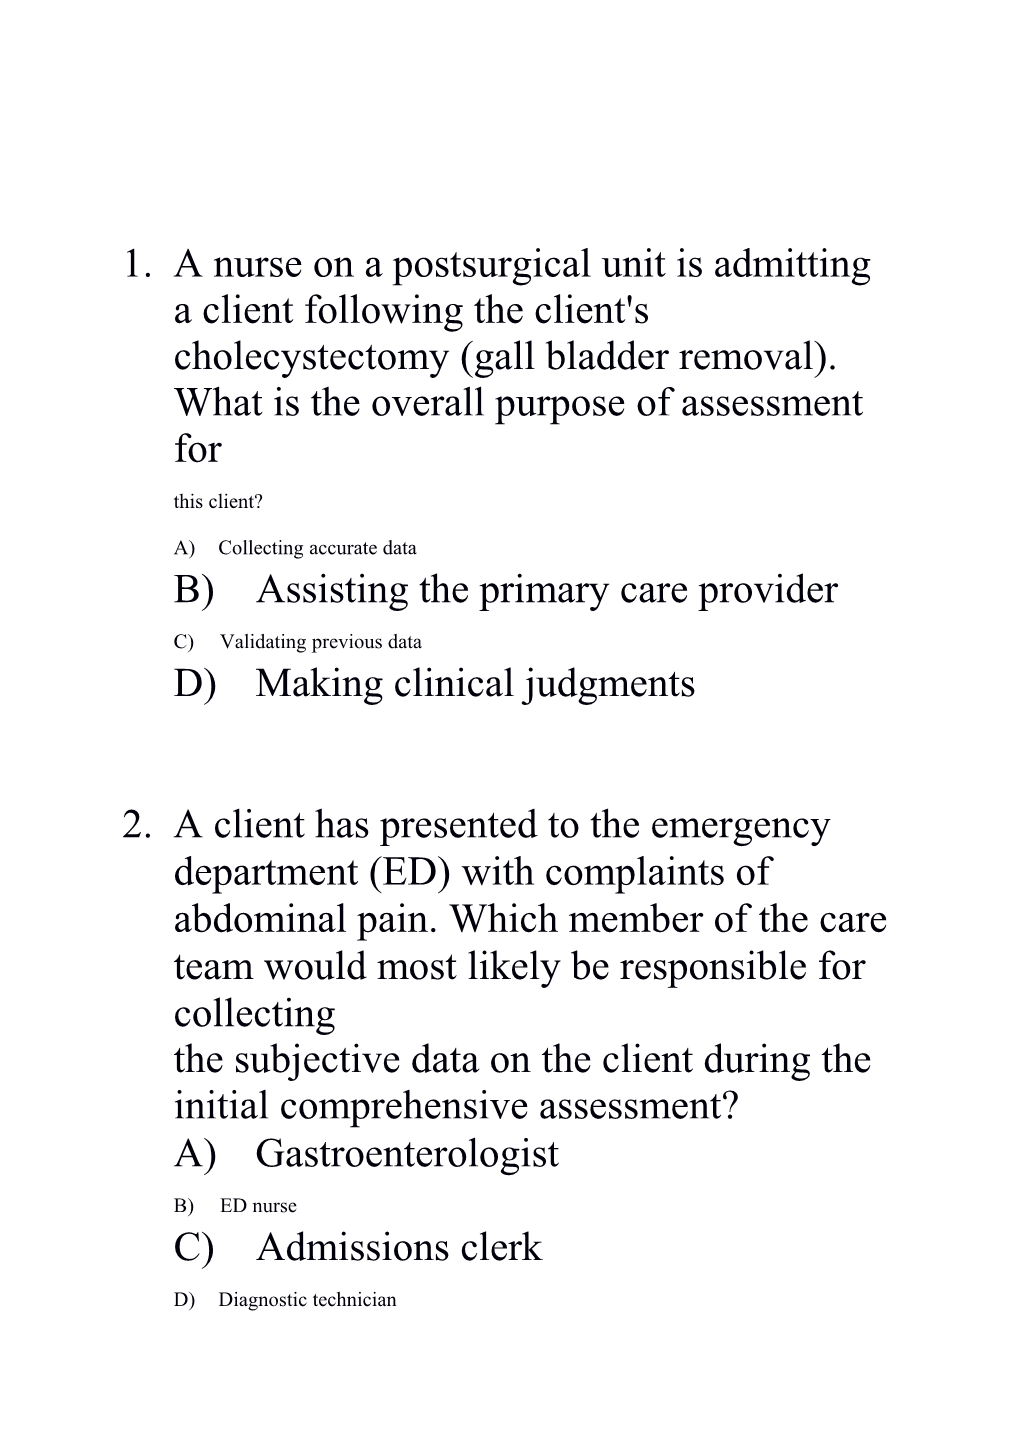 B) Assisting the Primary Care Provider